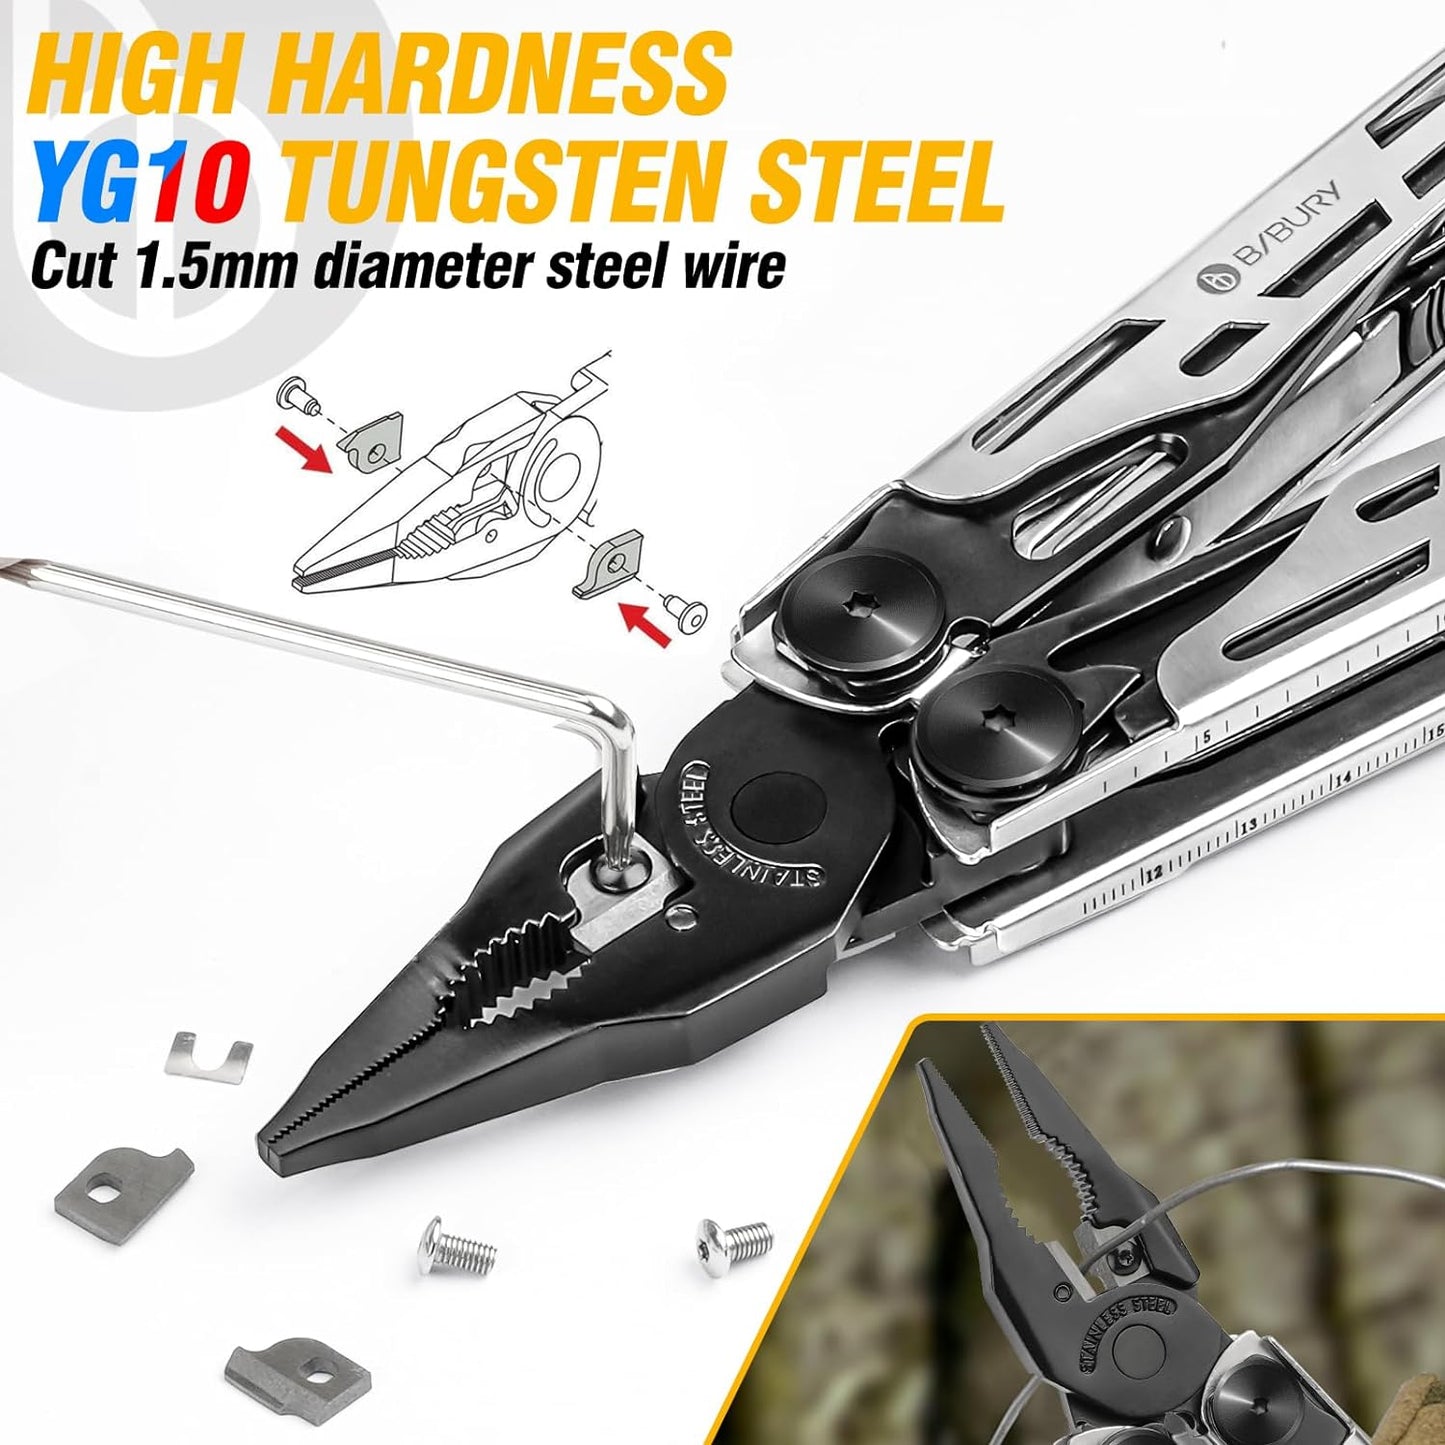 BIBURY Multitool Pliers, Stainless Steel 31-in-1 Multi Tool Pliers with Replaceable Wire Cutters and Saw, Foldable Multitools with Scissors and Screwdriver, Ideal for Camping, Survival, Gift for Him